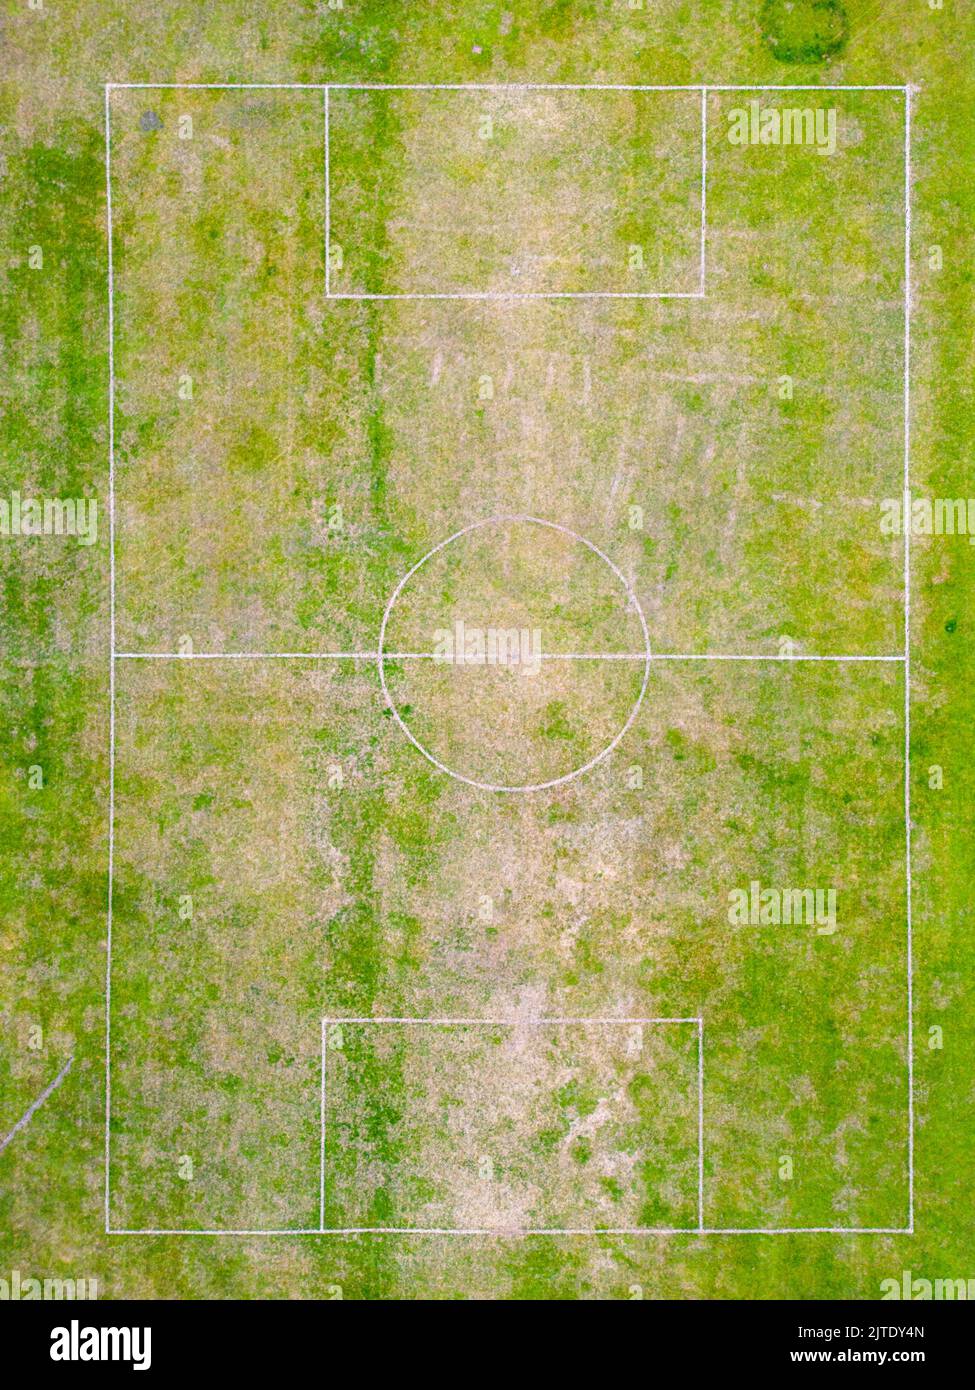 Aerial view of local football field during drought. Stock Photo